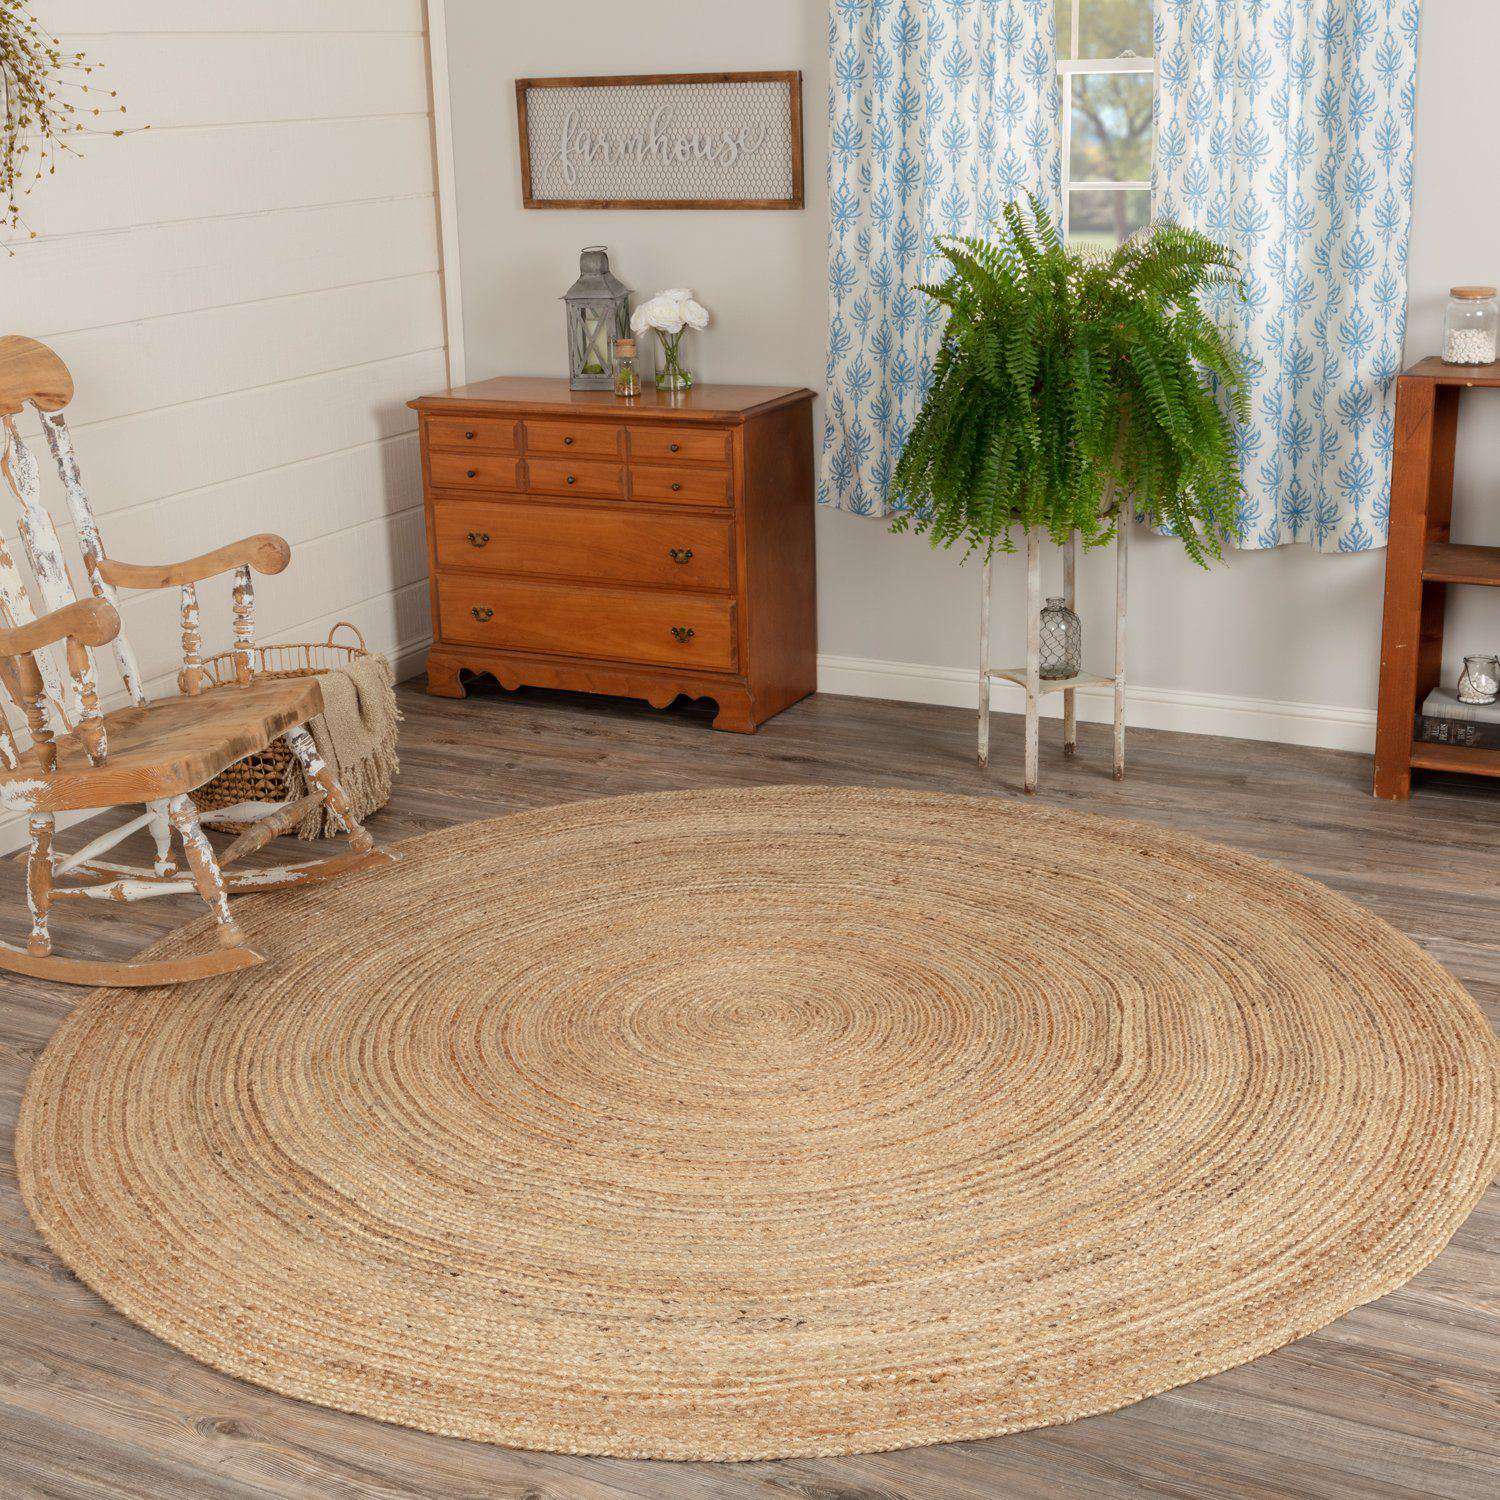 Harlow Jute Braided Round Rugs VHC Brands Rugs VHC Brands 6' Ft 